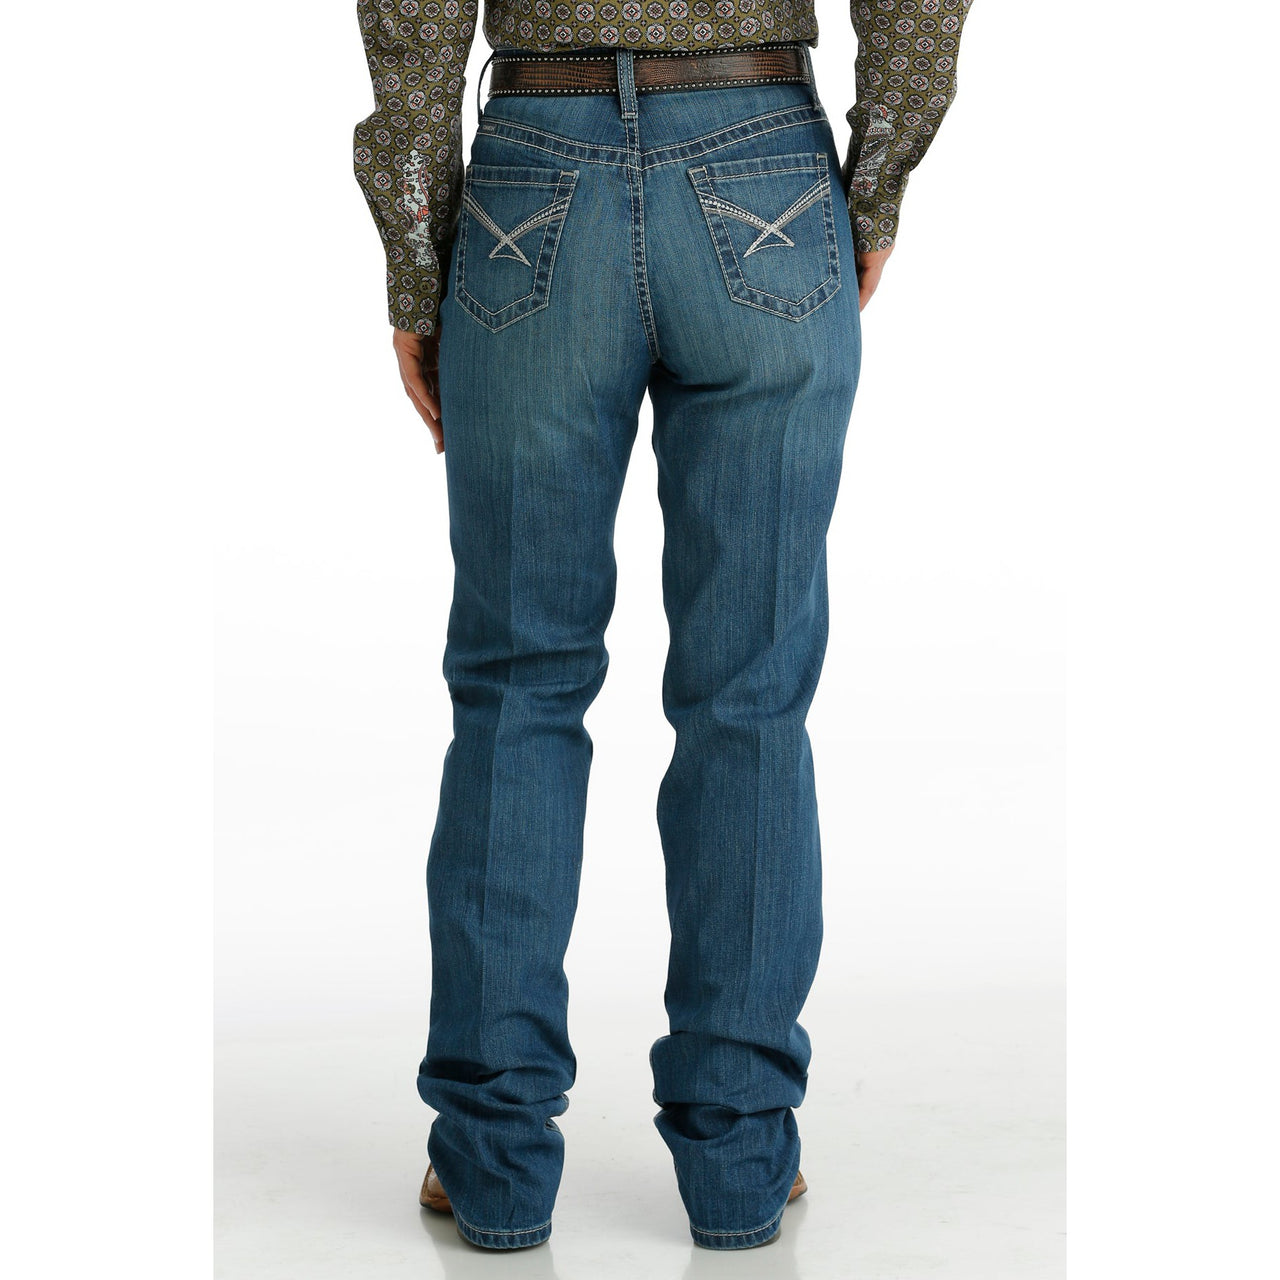 Cinch Women's Emerson Relaxed Fit Jeans - Medium Stonewash